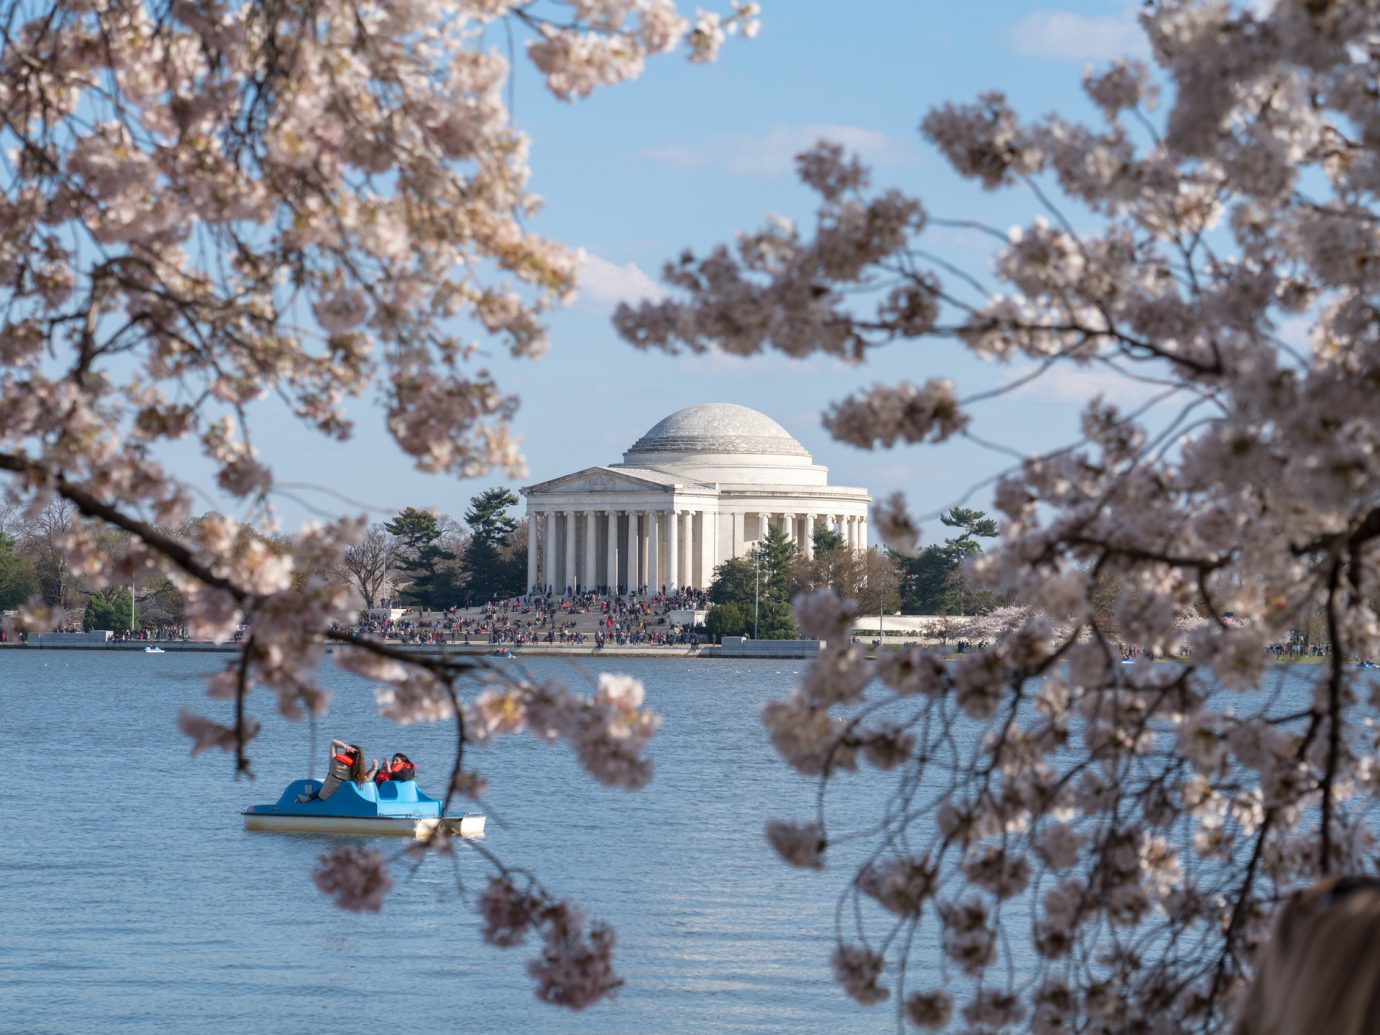 Washington DC, USA - April 08, 2018: Jefferson Memorial and cherry trees blossoming around Tidal Basin with a pedal boat.